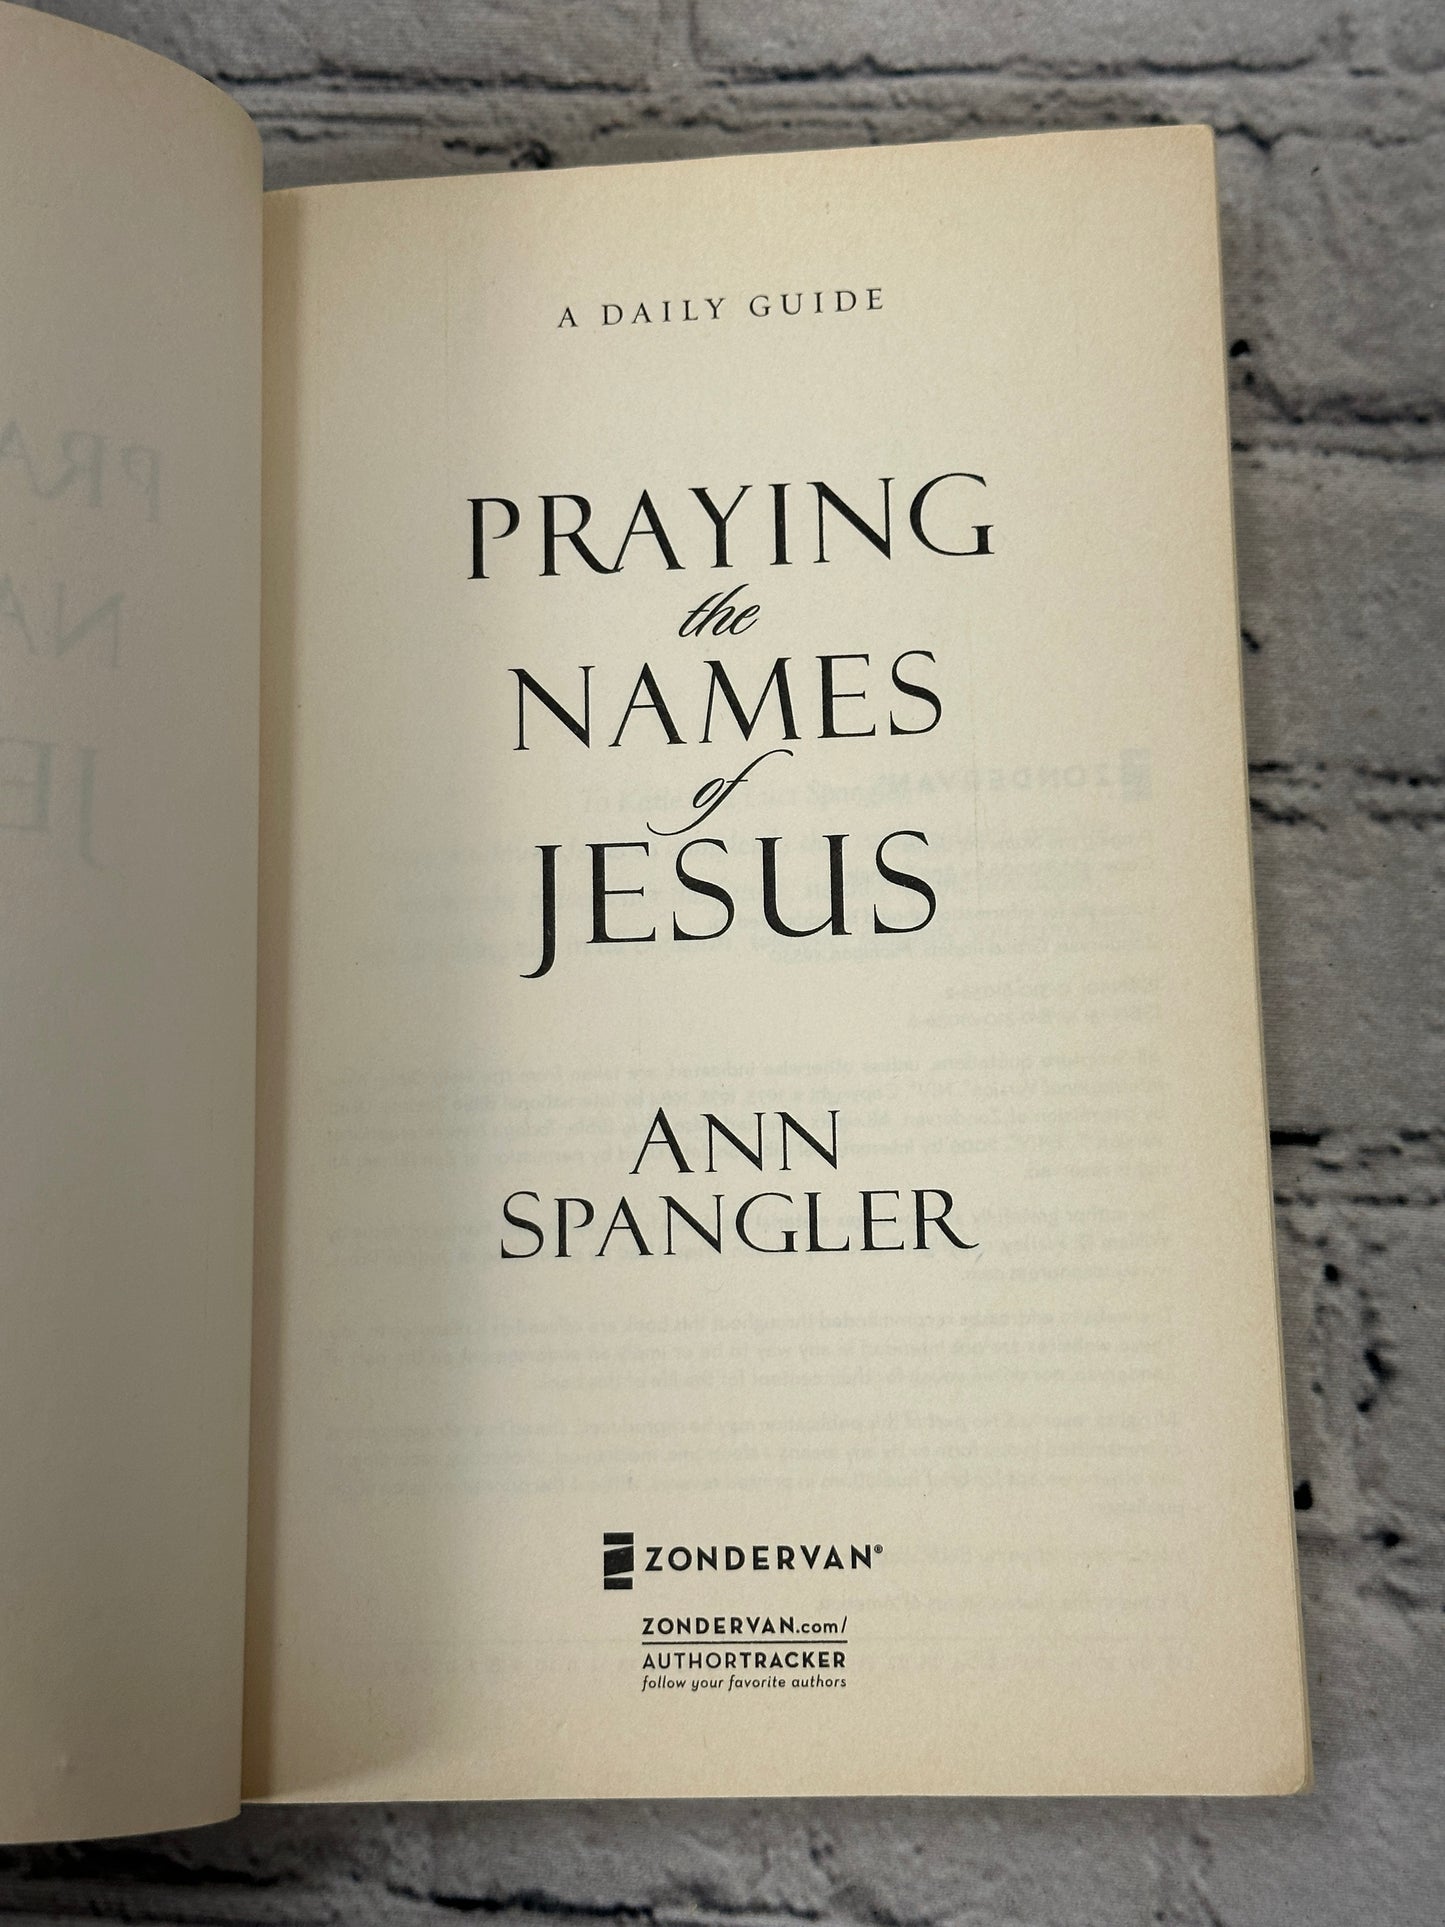 Praying the Names of Jesus: A Daily Guide by Ann Spangler [2006]